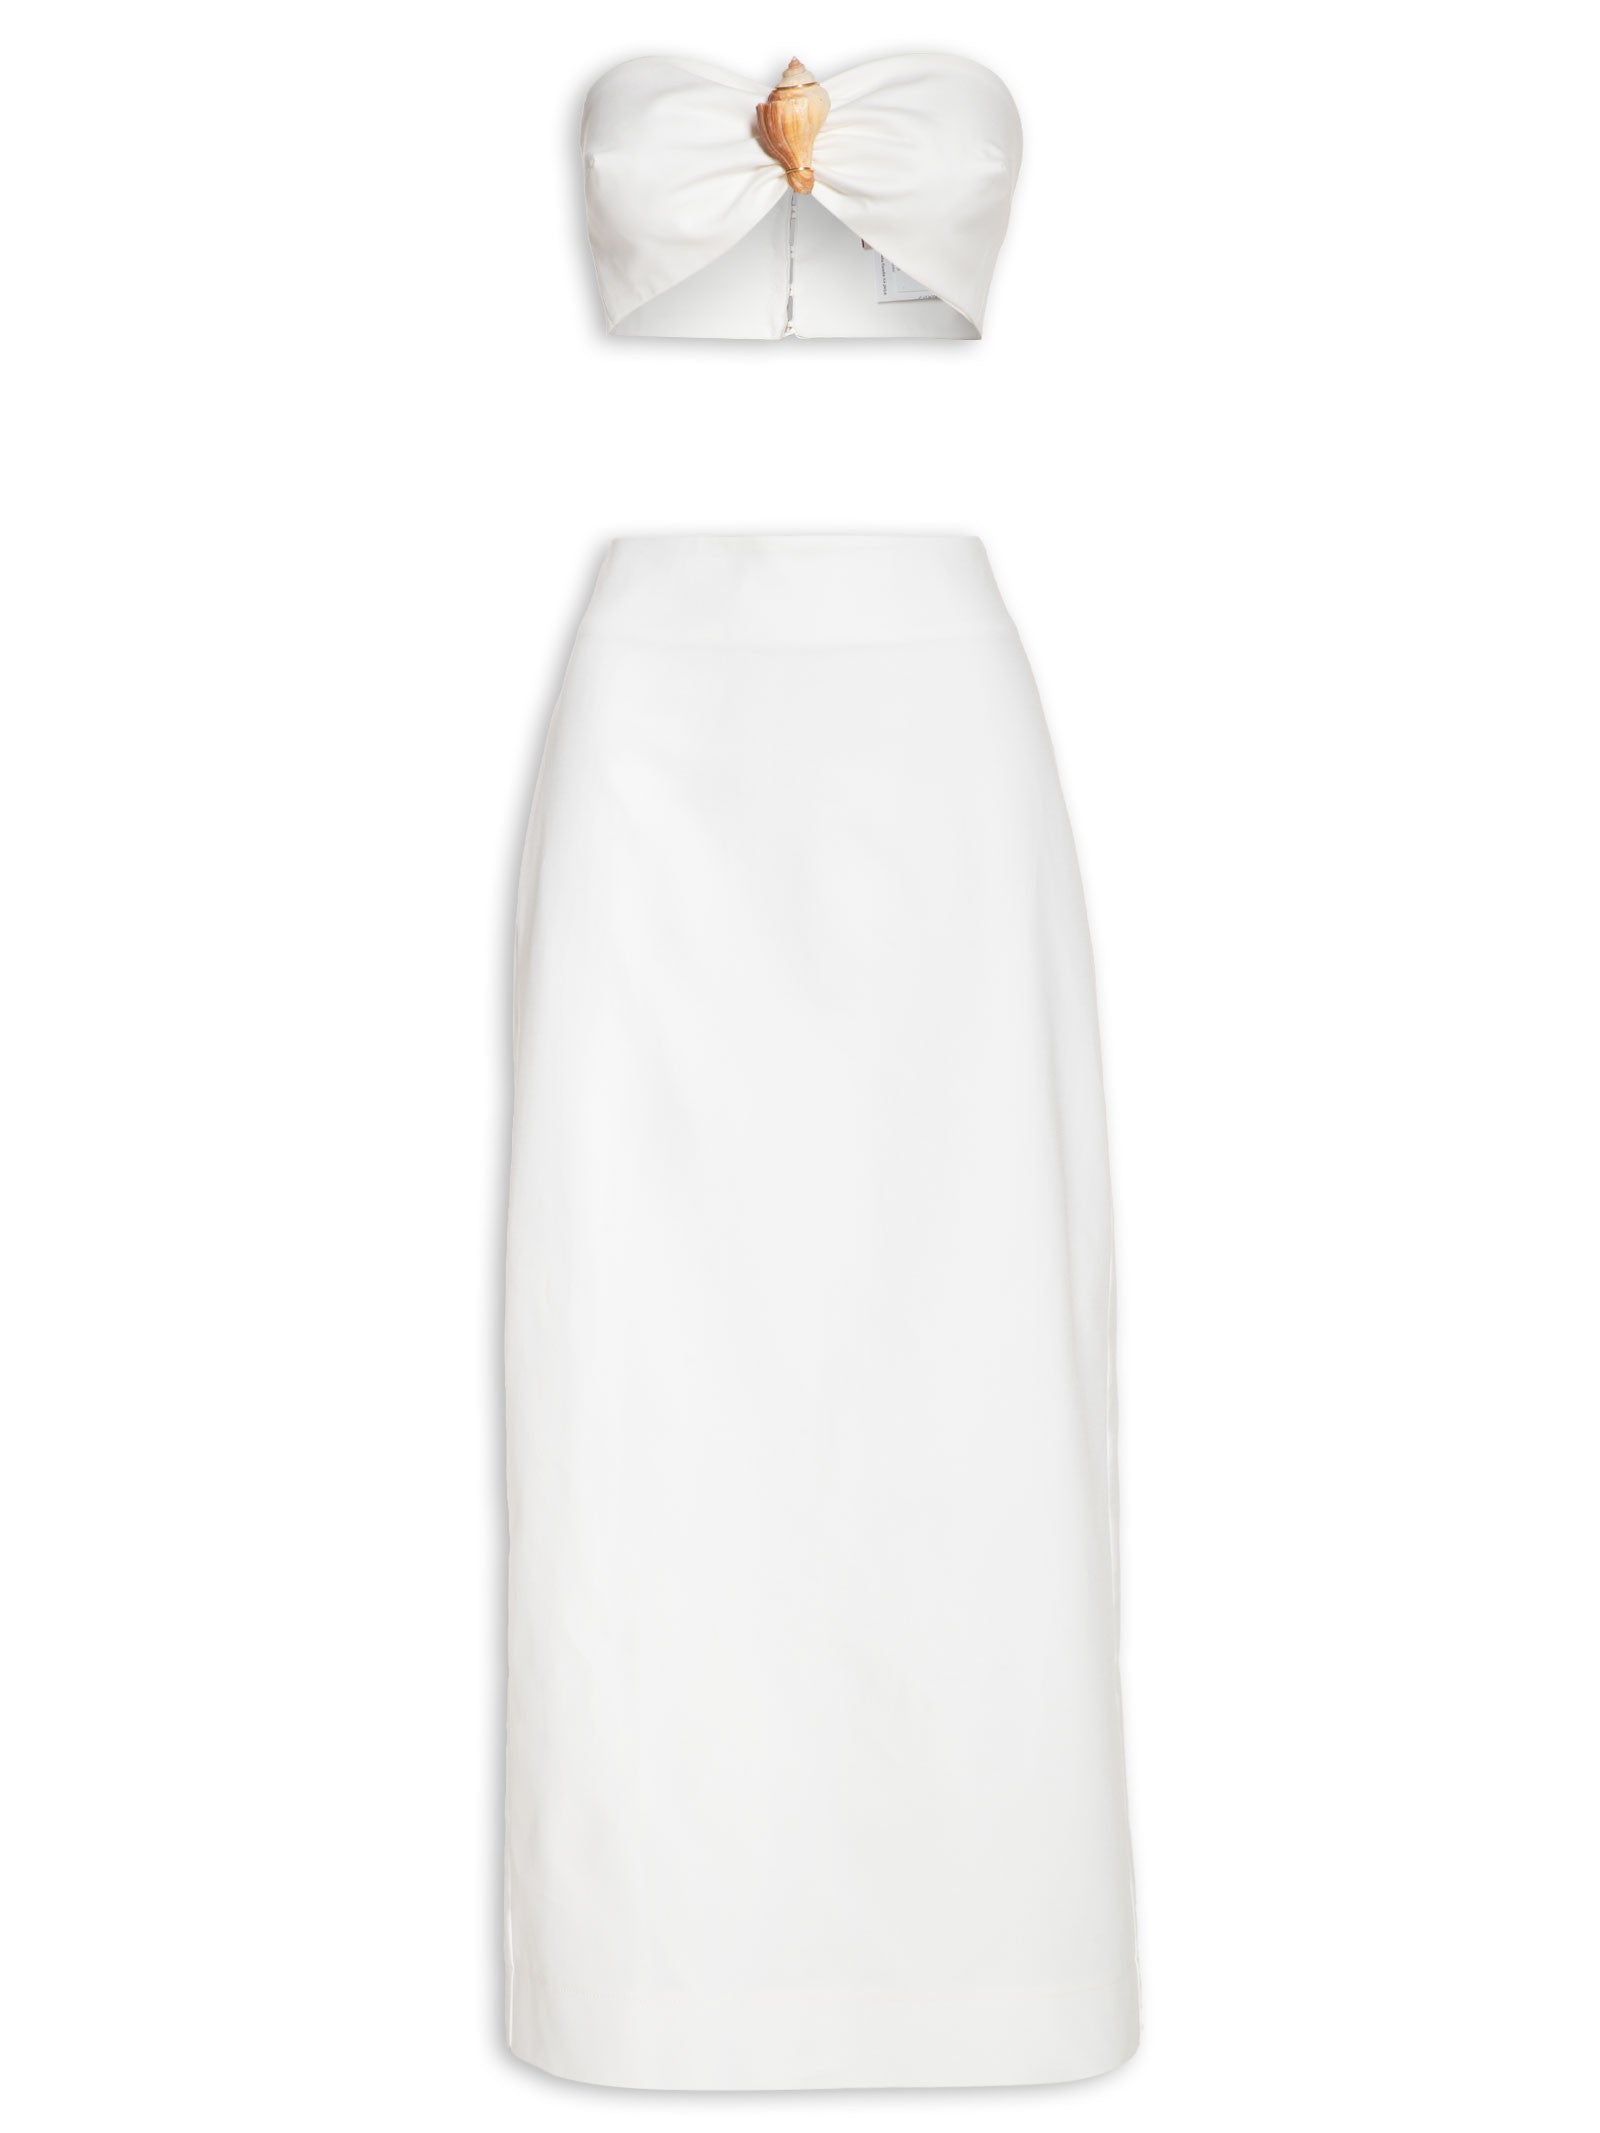 Off-White Solid Cotton Top & Skirt Set Product